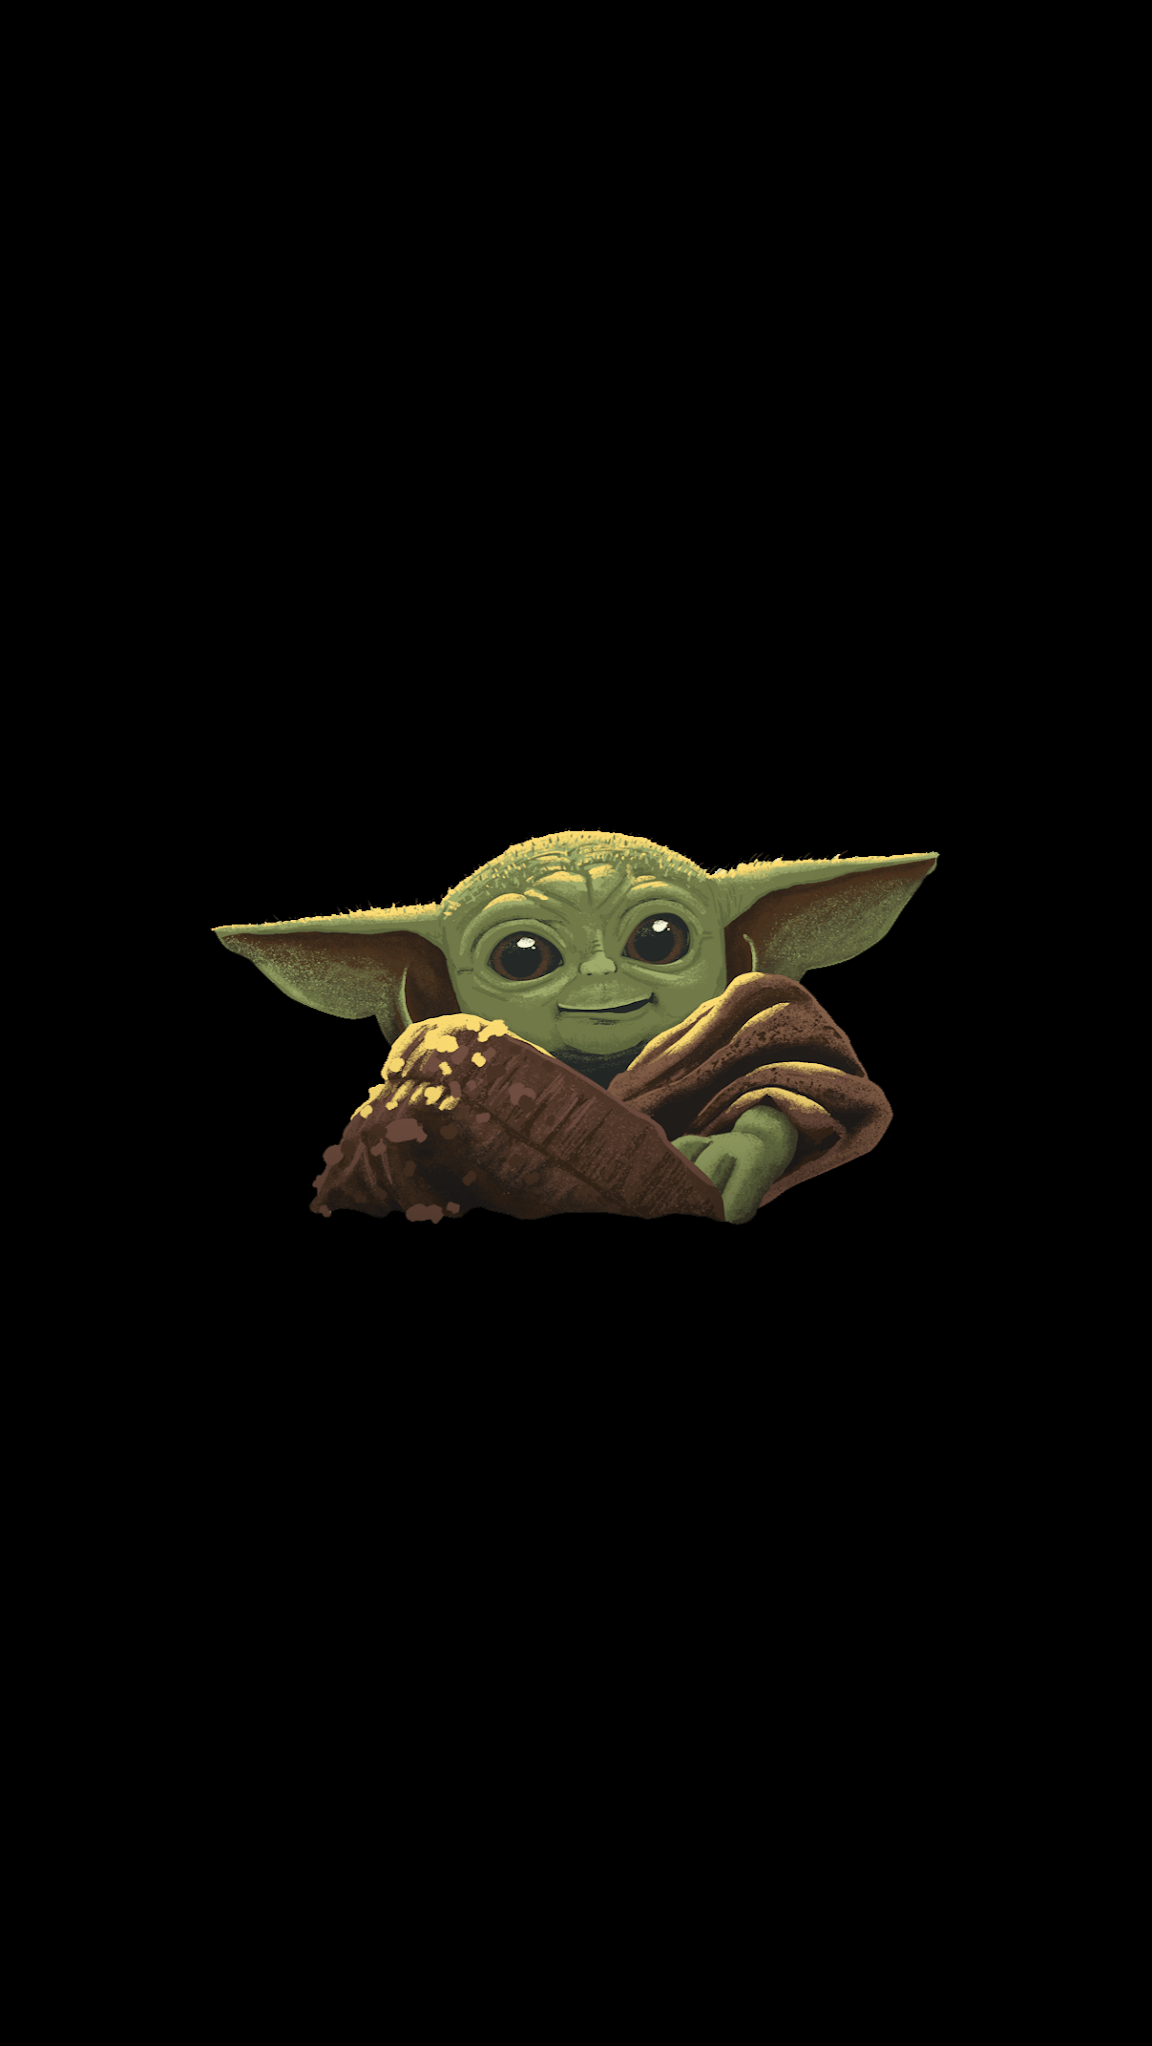 Perfect Baby Yoda Wallpaper Aesthetic Laptop You Can Get It Free